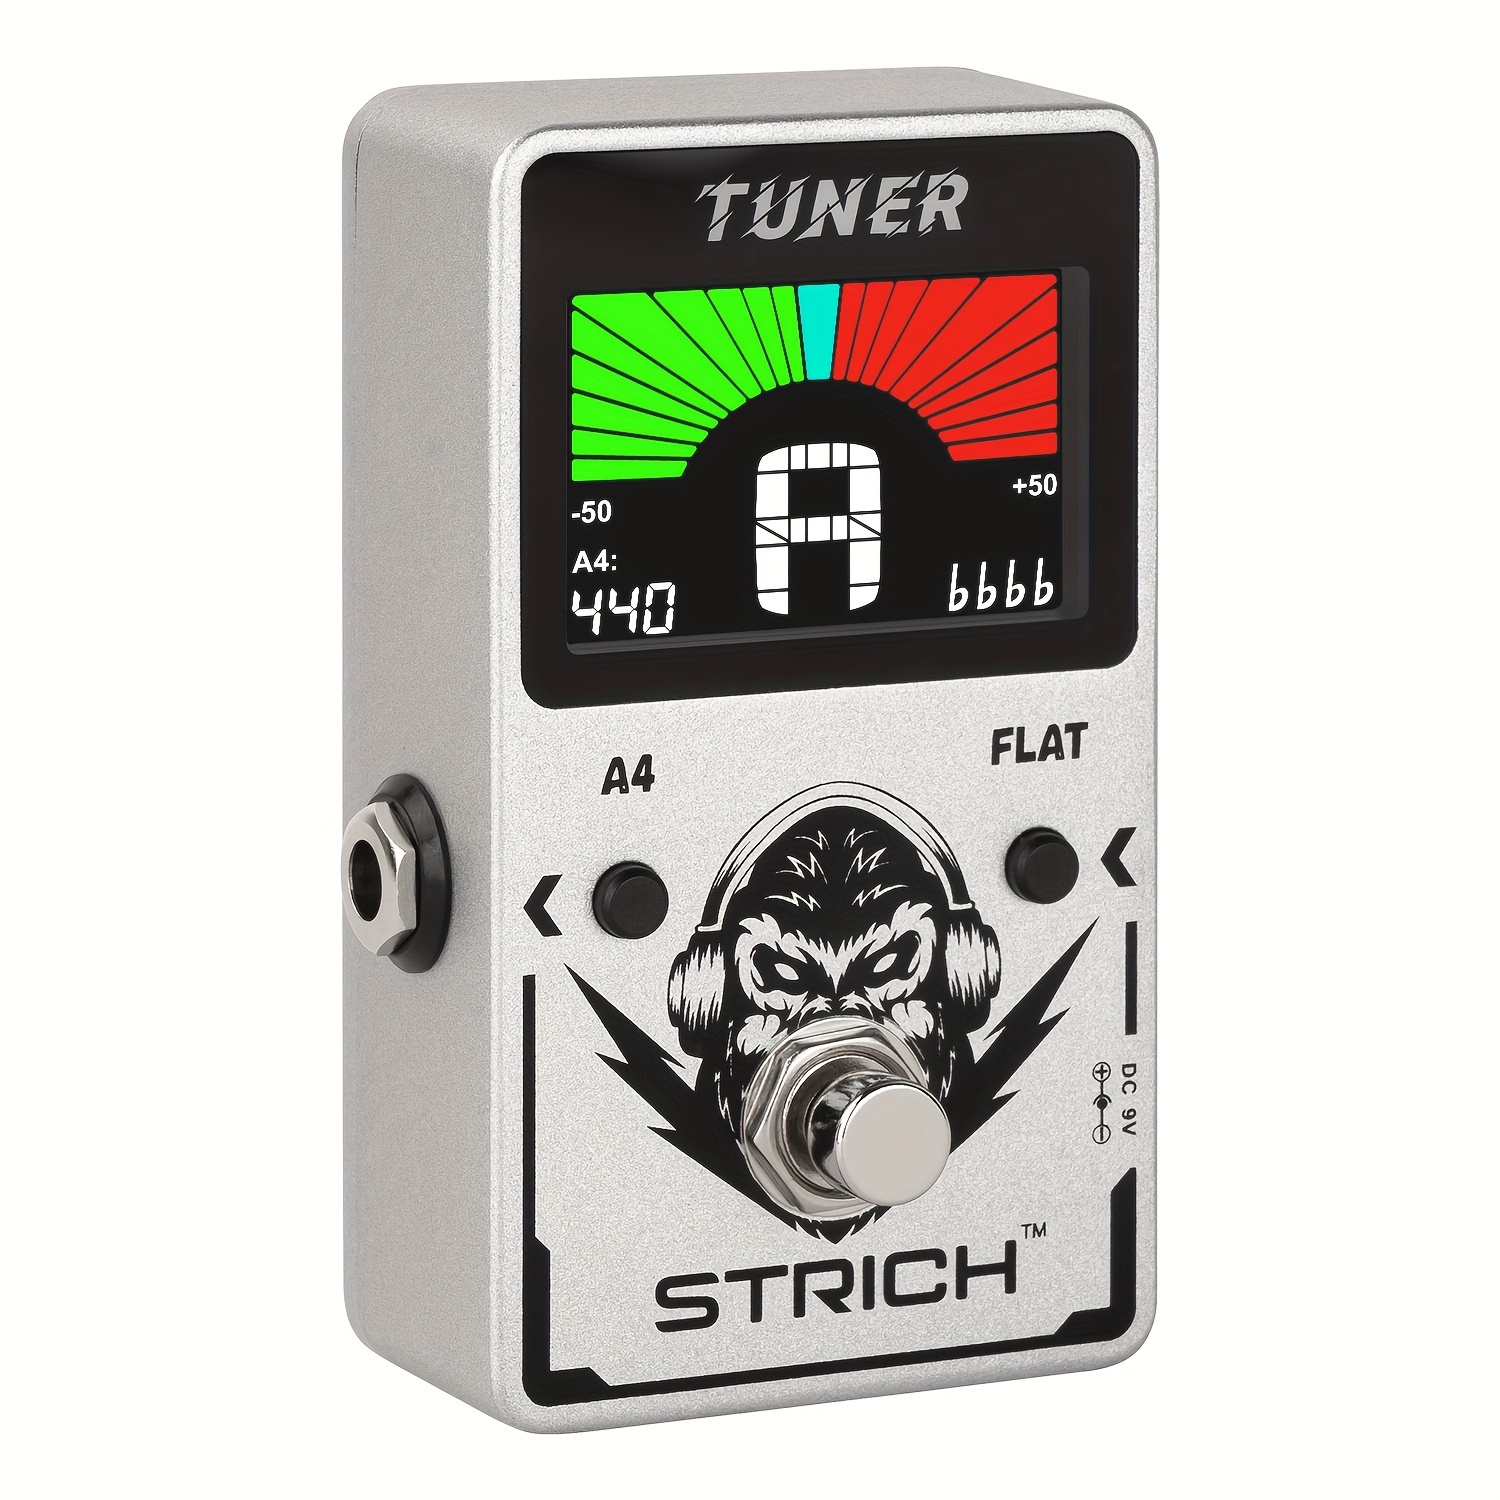 

Strich Guitar Tuner Pedal With Large Color Screen - Precision Chromatic Drop Tuning, 430-450hz A4, True Bypass For Electric Guitar & Bass